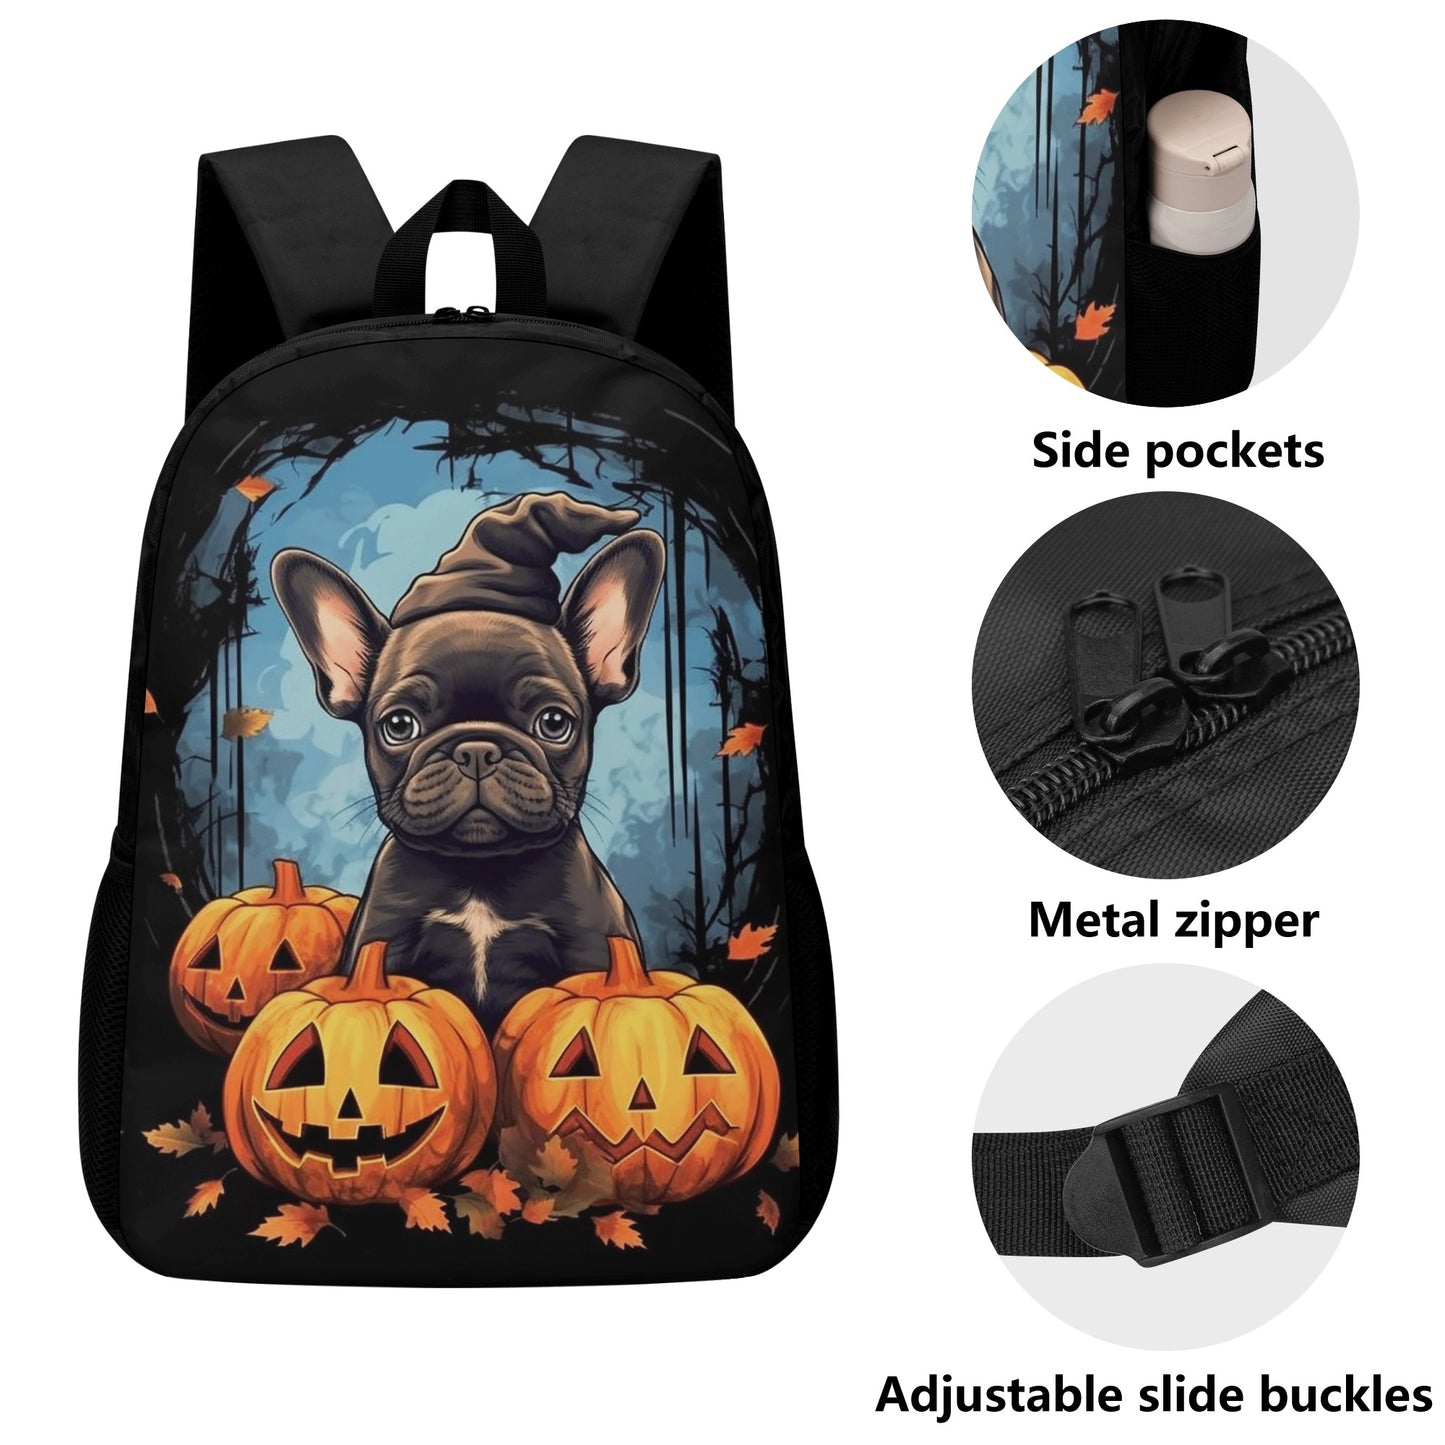 Halloween Time - 17 Inch Laptop Backpack